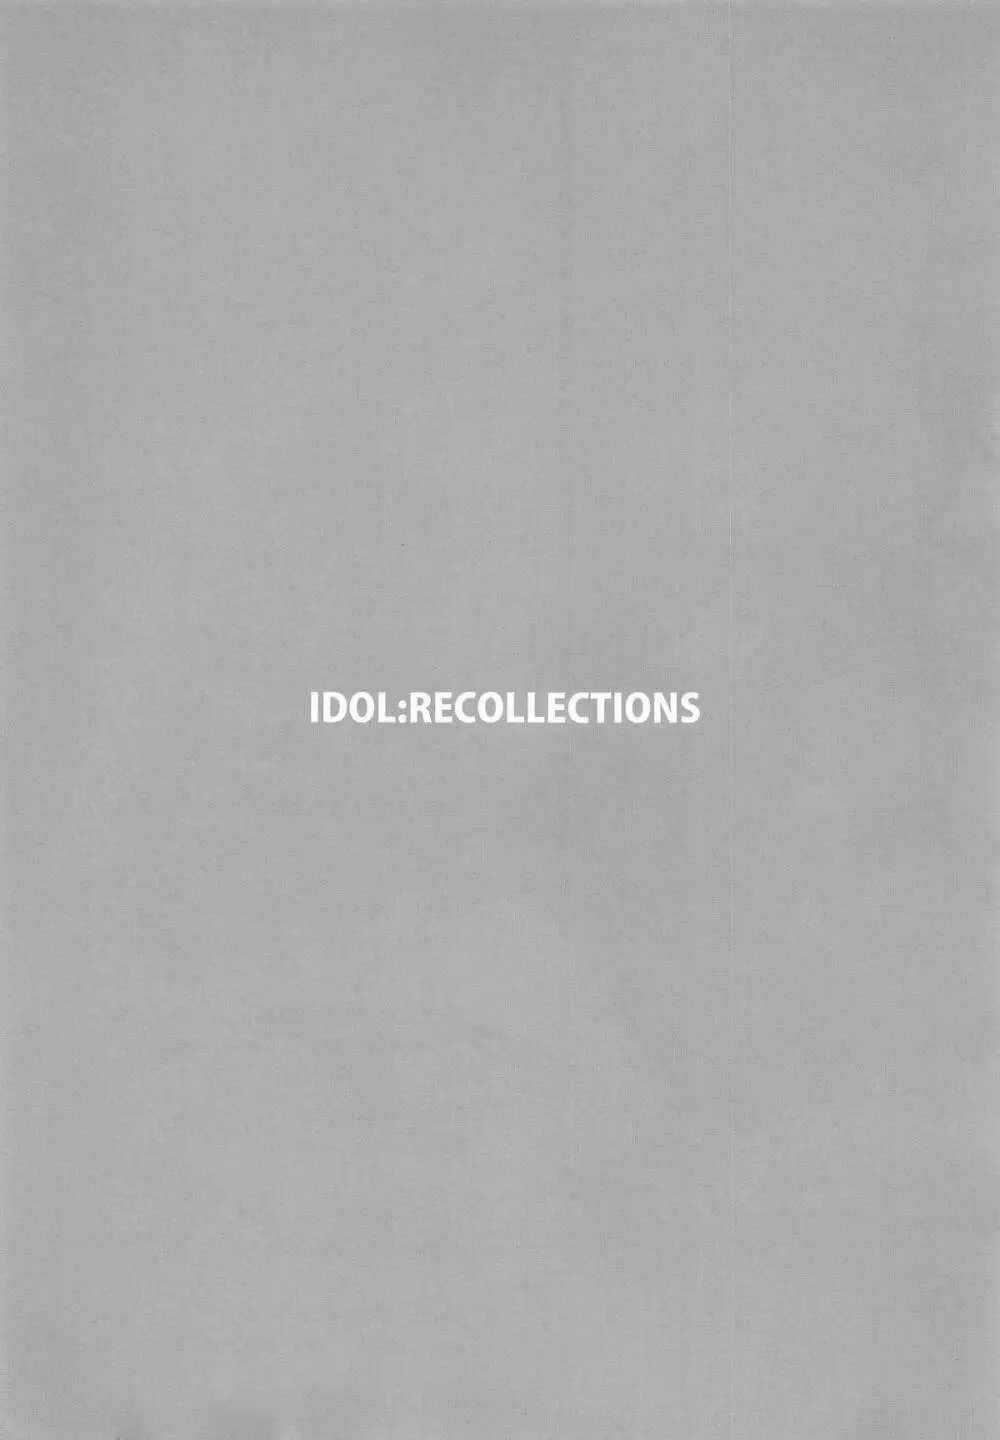 lDOL:RECOLLECTlONS 2ページ